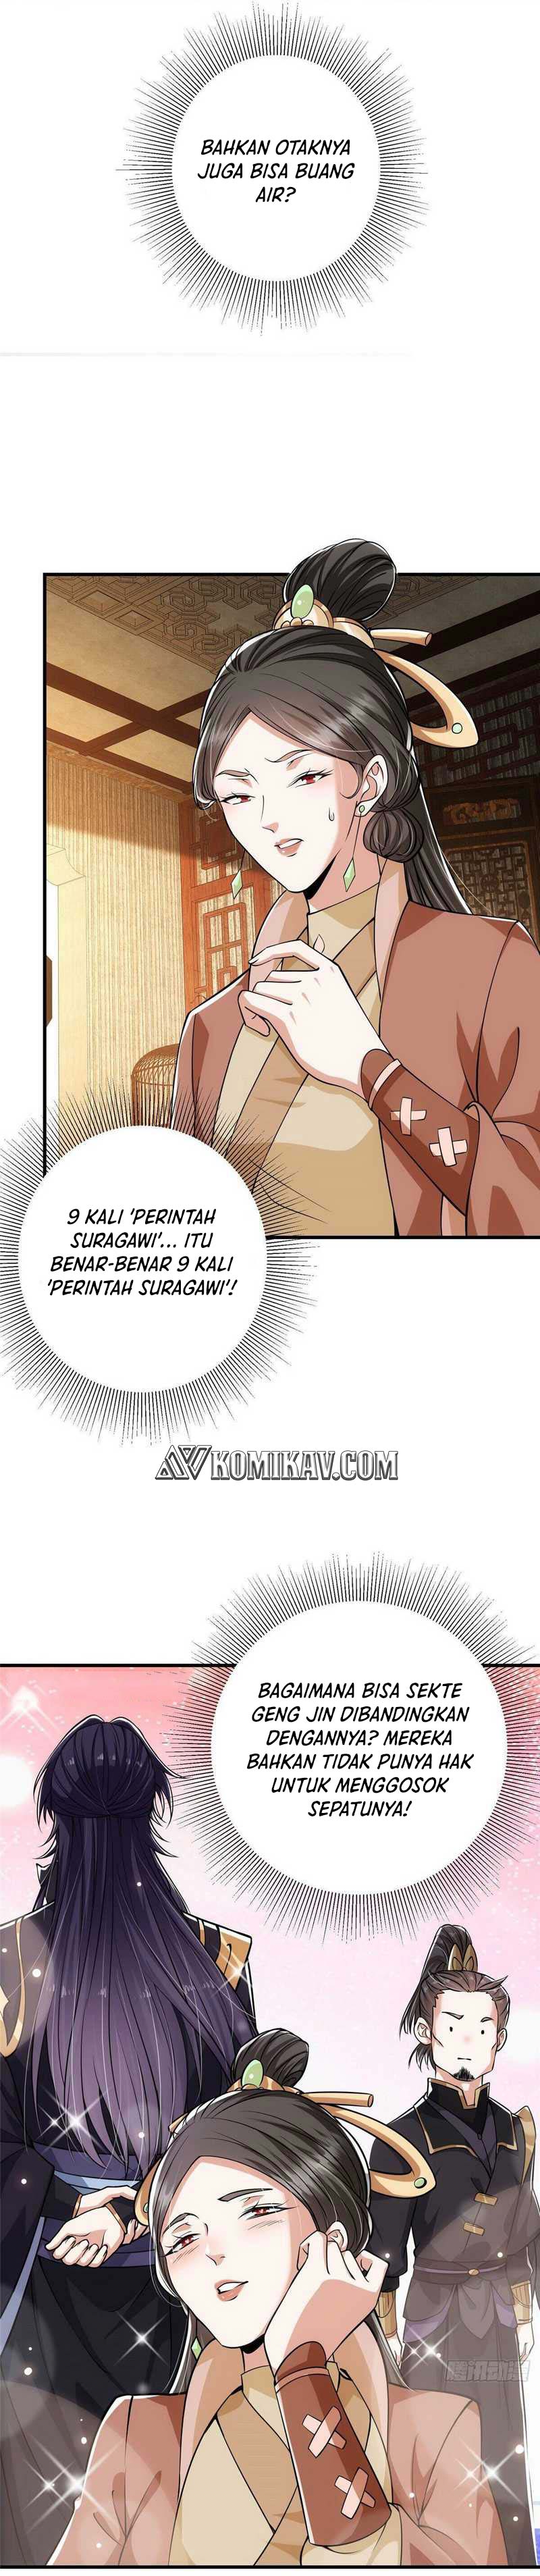 Keep A Low Profile, Sect Leader Chapter 27 Bahasa Indonesia